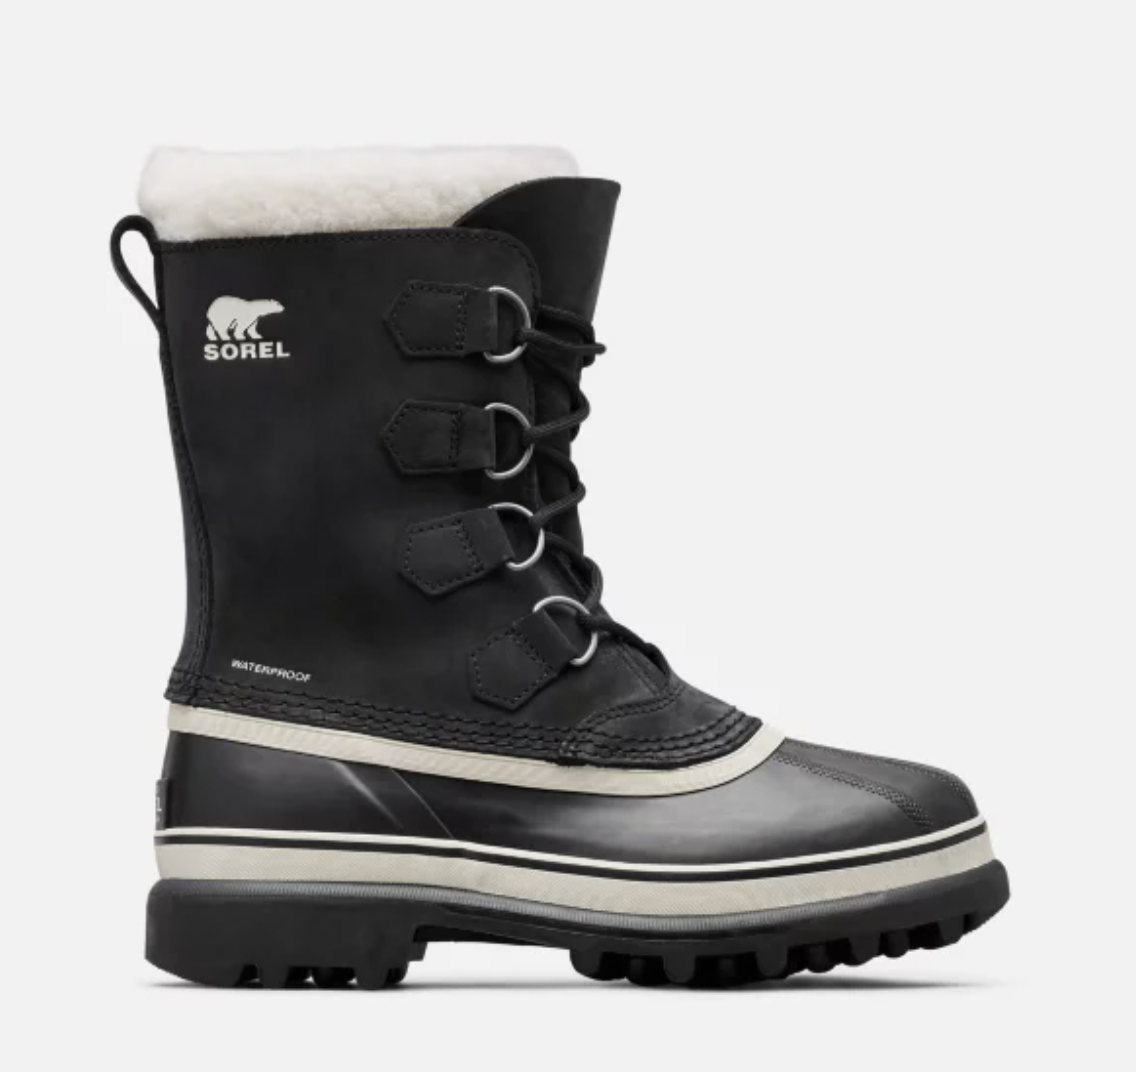 SOREL Canada Black Friday Early Access Sale Save 25 OFF Many Styles